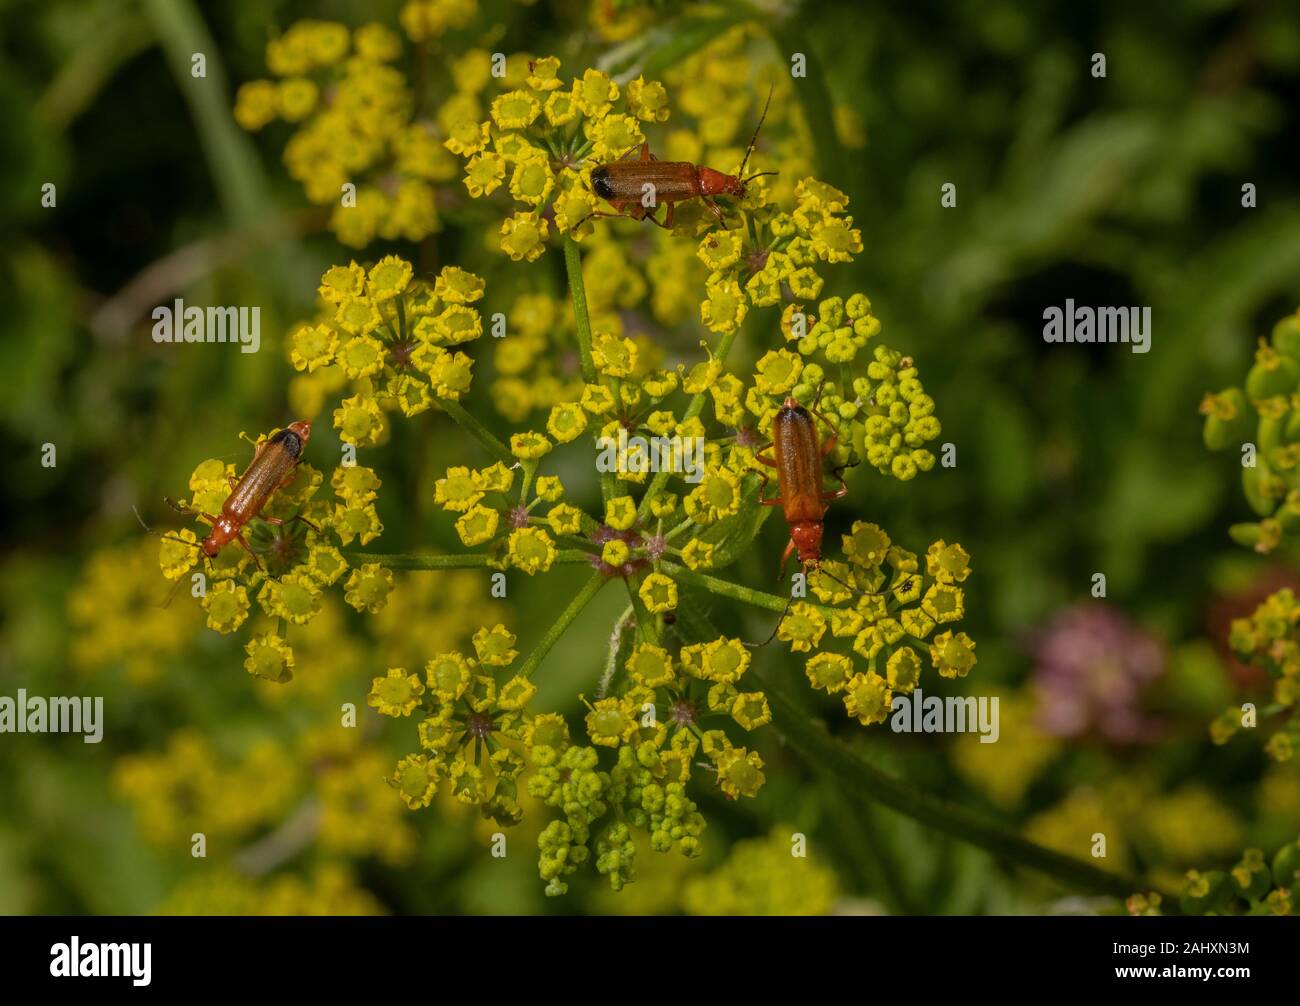 Mass of insects, mainly Common Red Soldier Beetle, visiting the flowers of Wild Parsnip, Pastinaca sativa Stock Photo